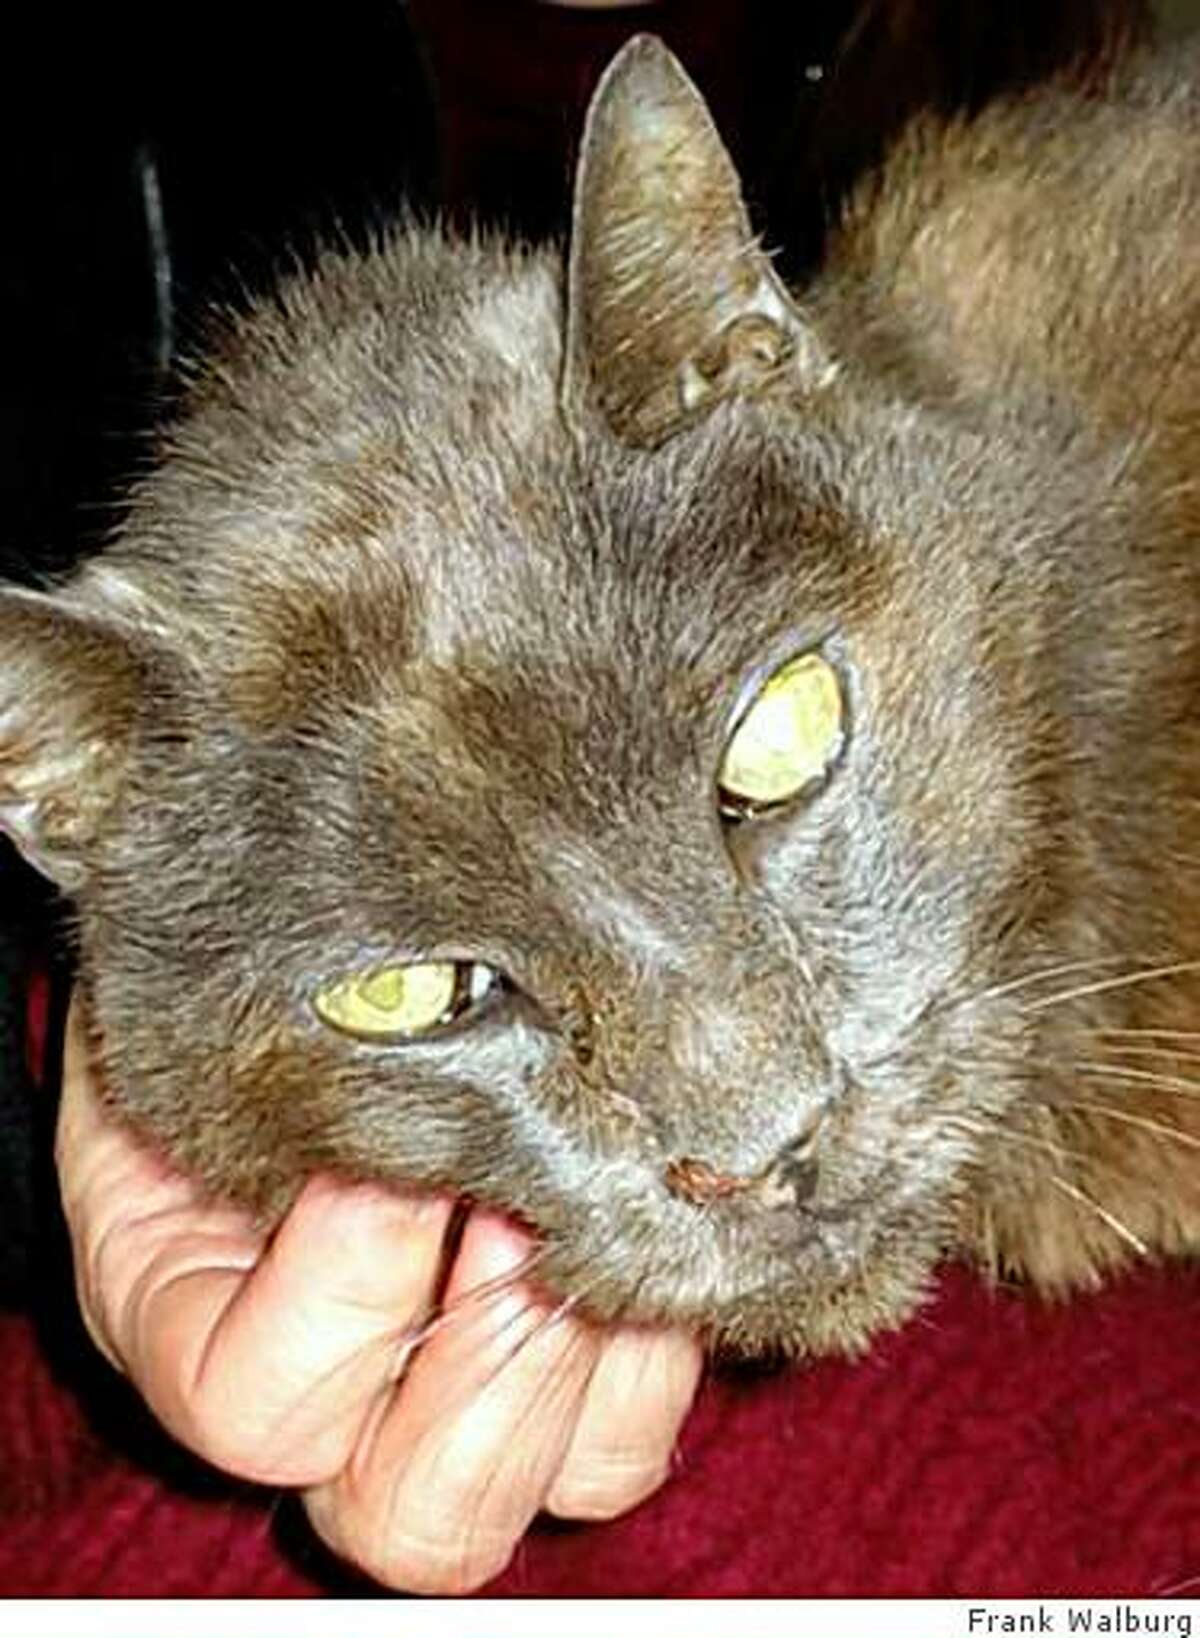 George the cat was reunited with family after 13 years.